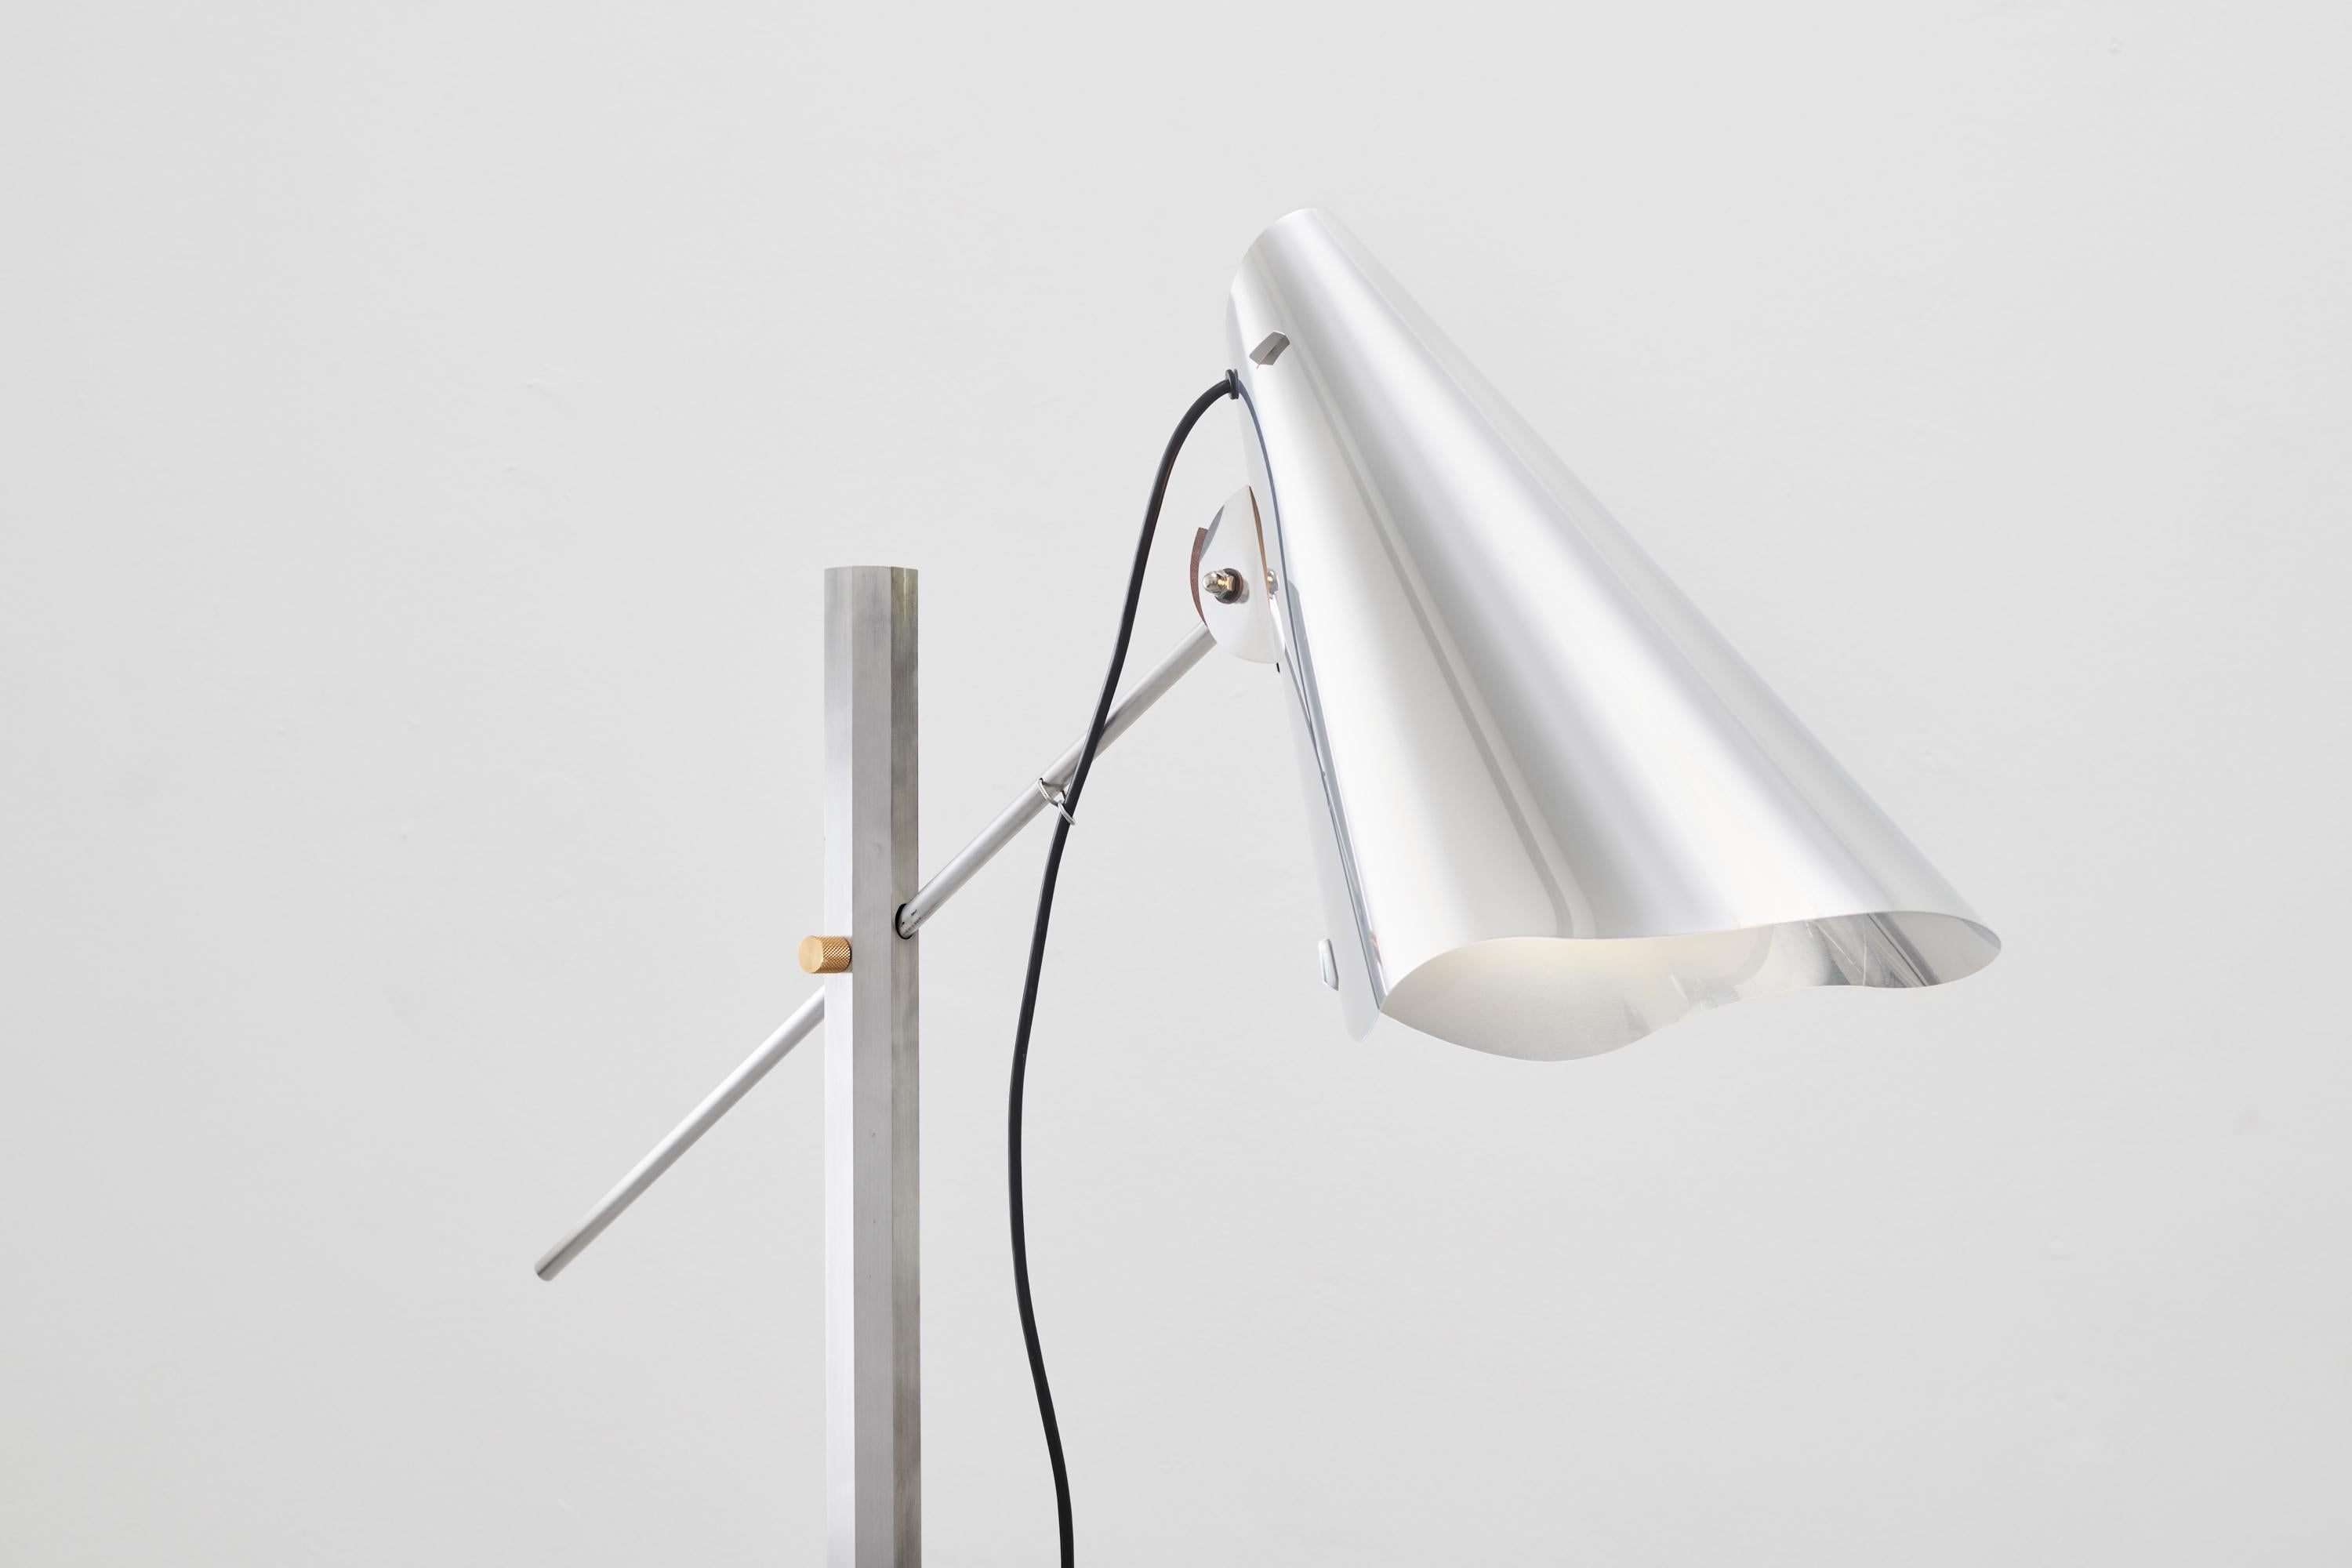 A new version of the original and taller street lamp by the Danish artist FOS.
Aluminum rod and shade with brass detail with concrete base. 
Also available in a wood and brass version.
Custom sizing available.
 